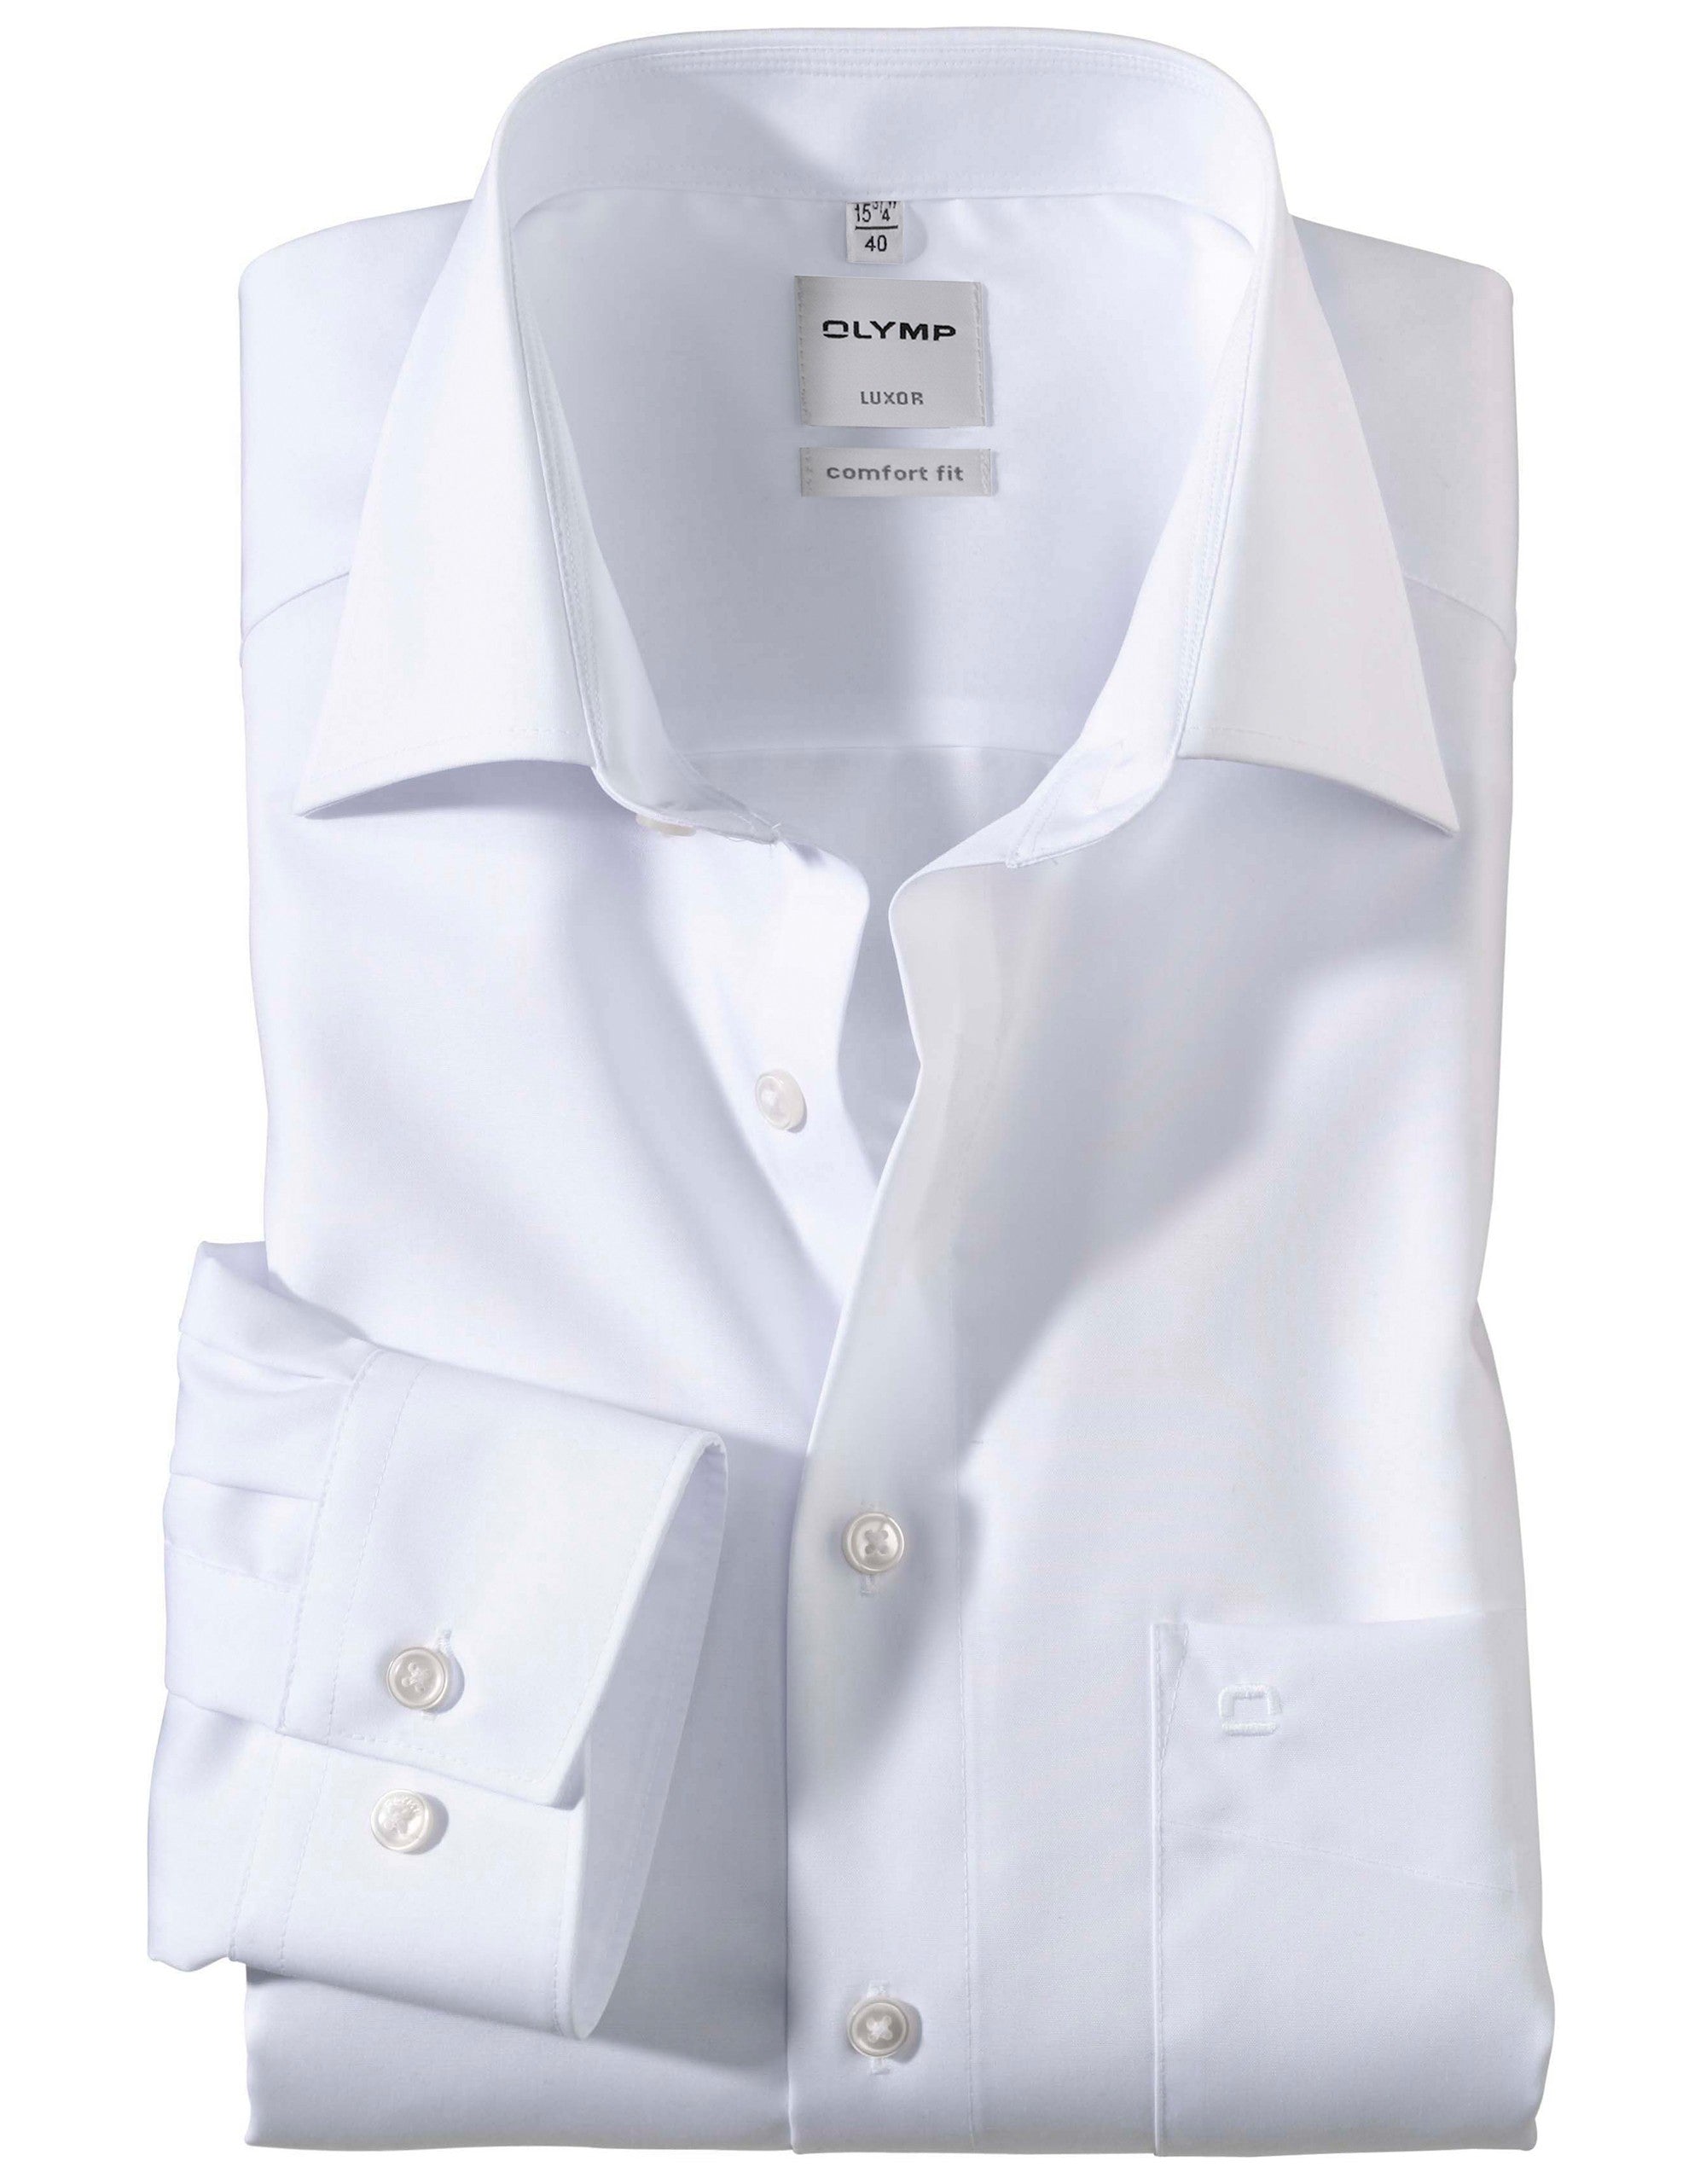 Olymp Comfort Fit White Shirt